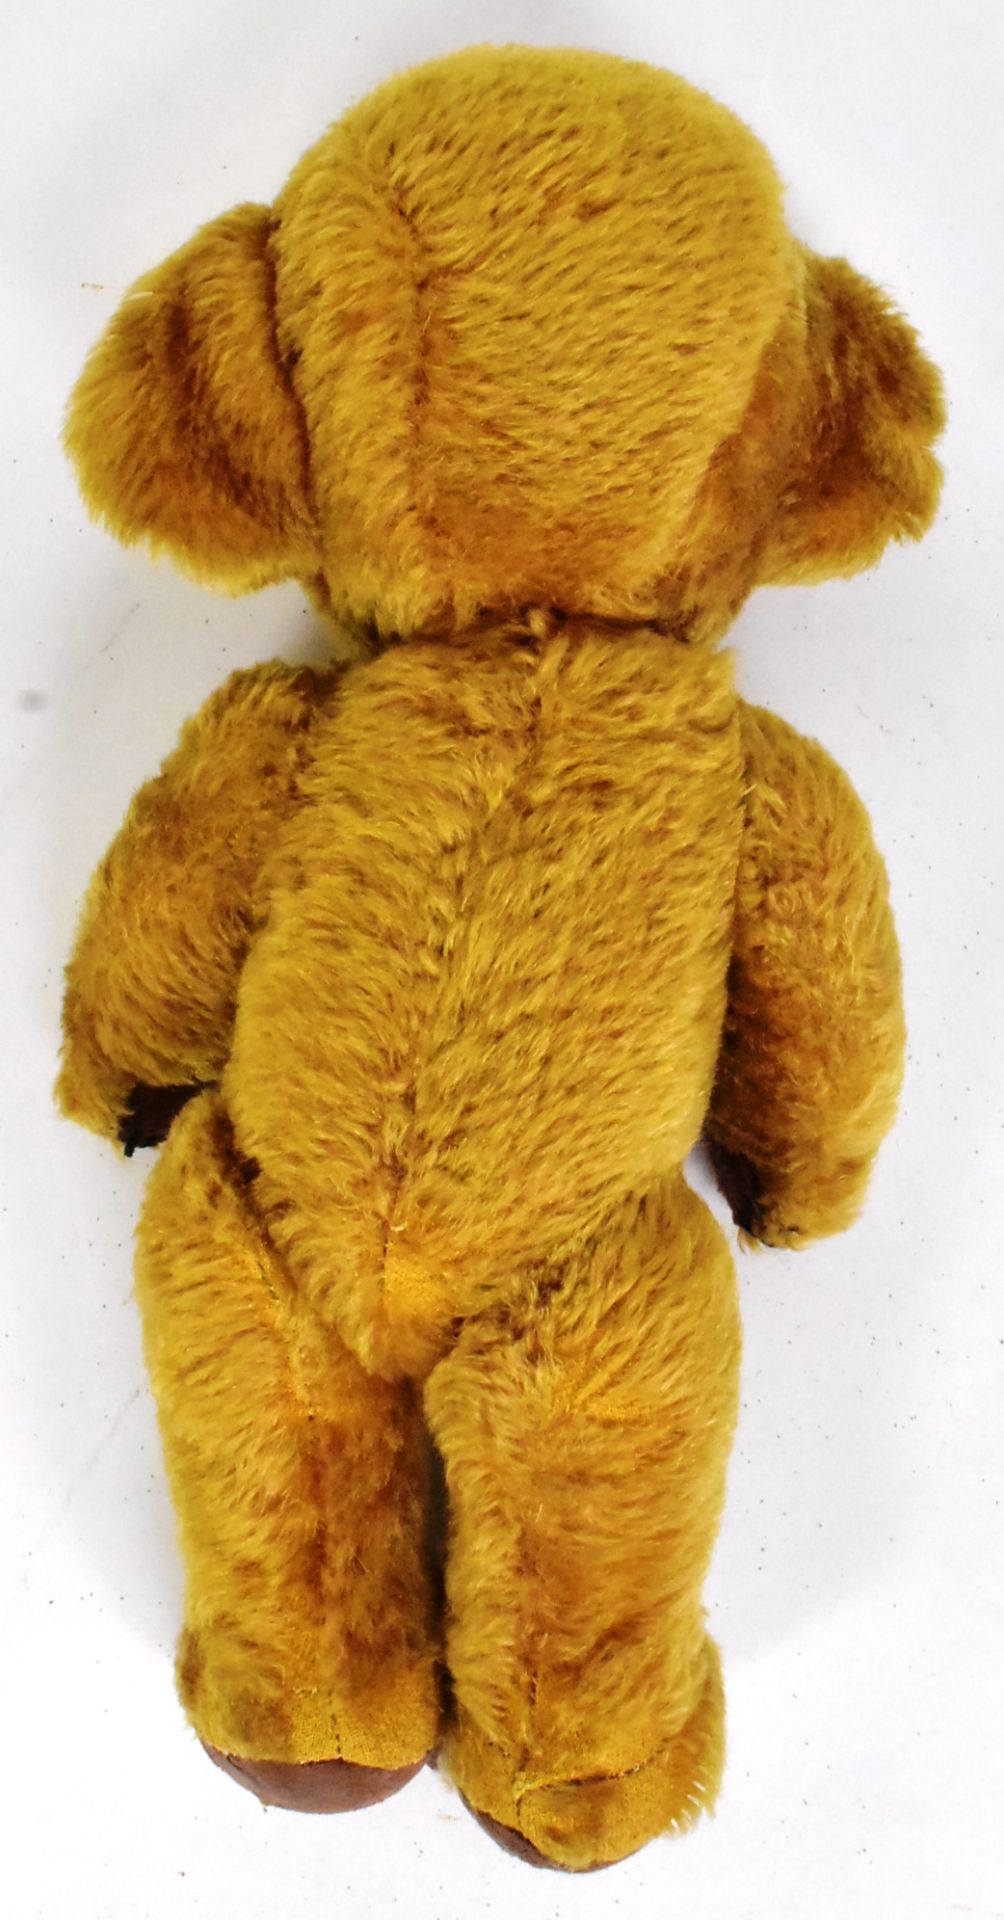 TEDDY BEAR - VINTAGE MERRYTHOUGHT GOLDEN CHEEKY BEAR - Image 5 of 5